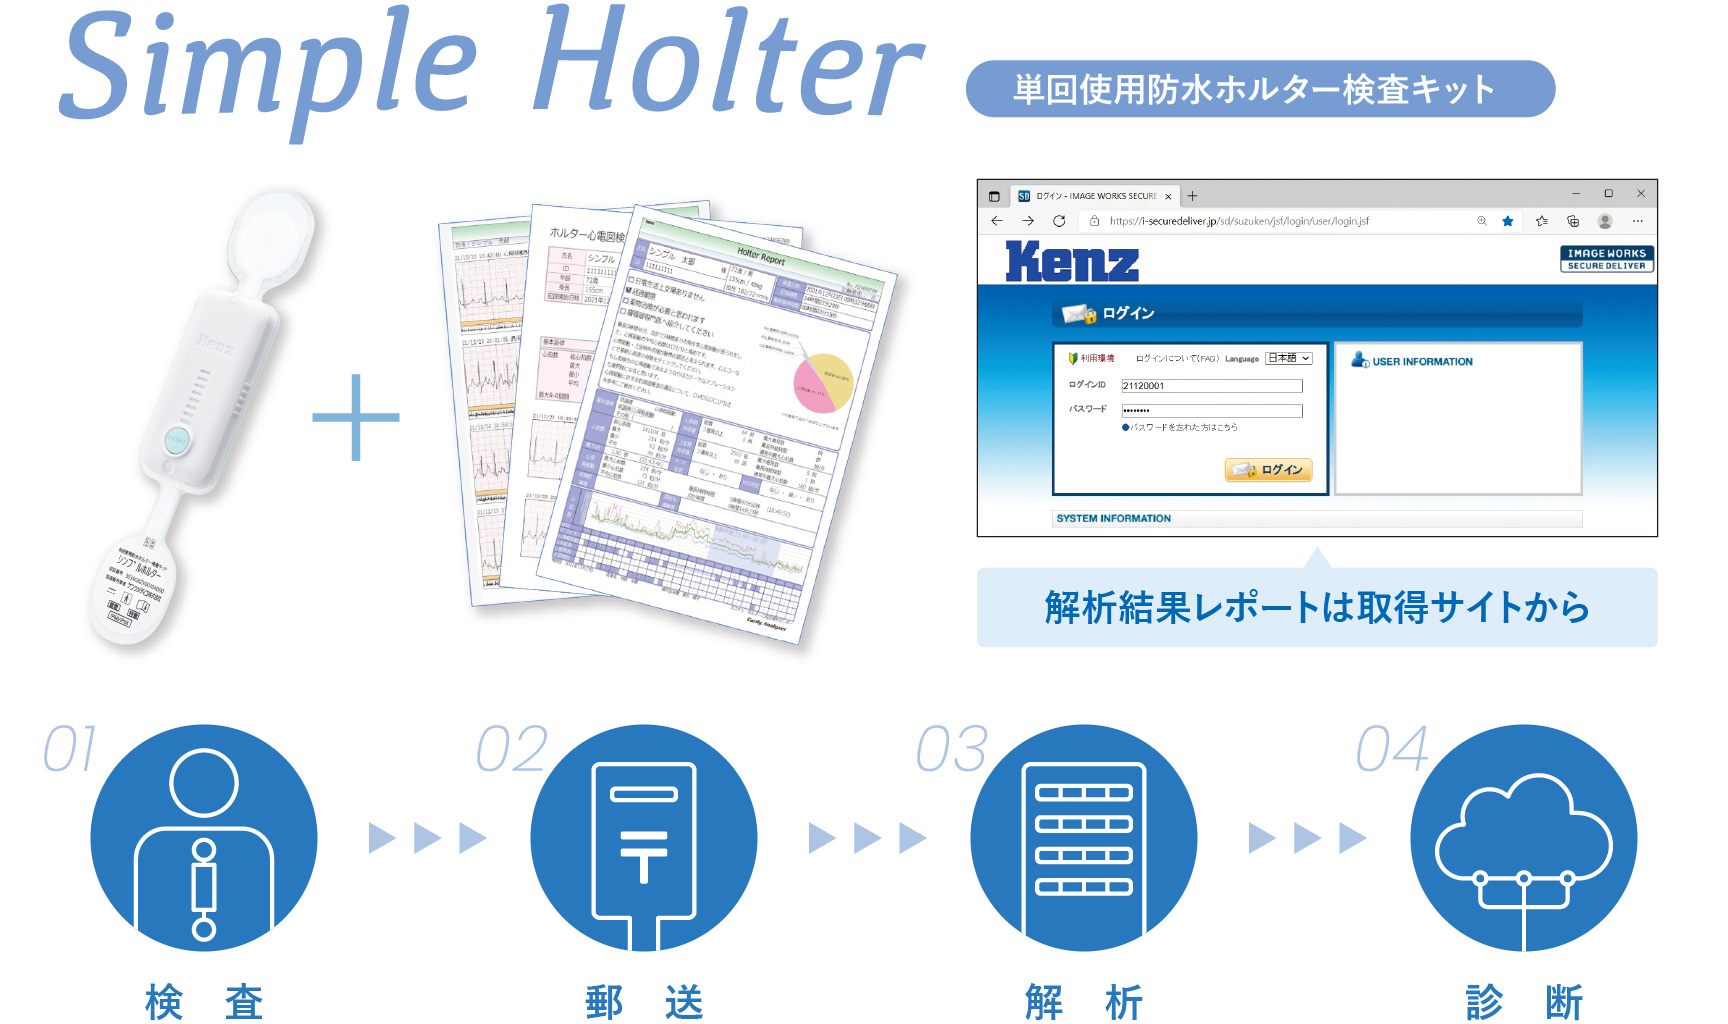 Simple Holter